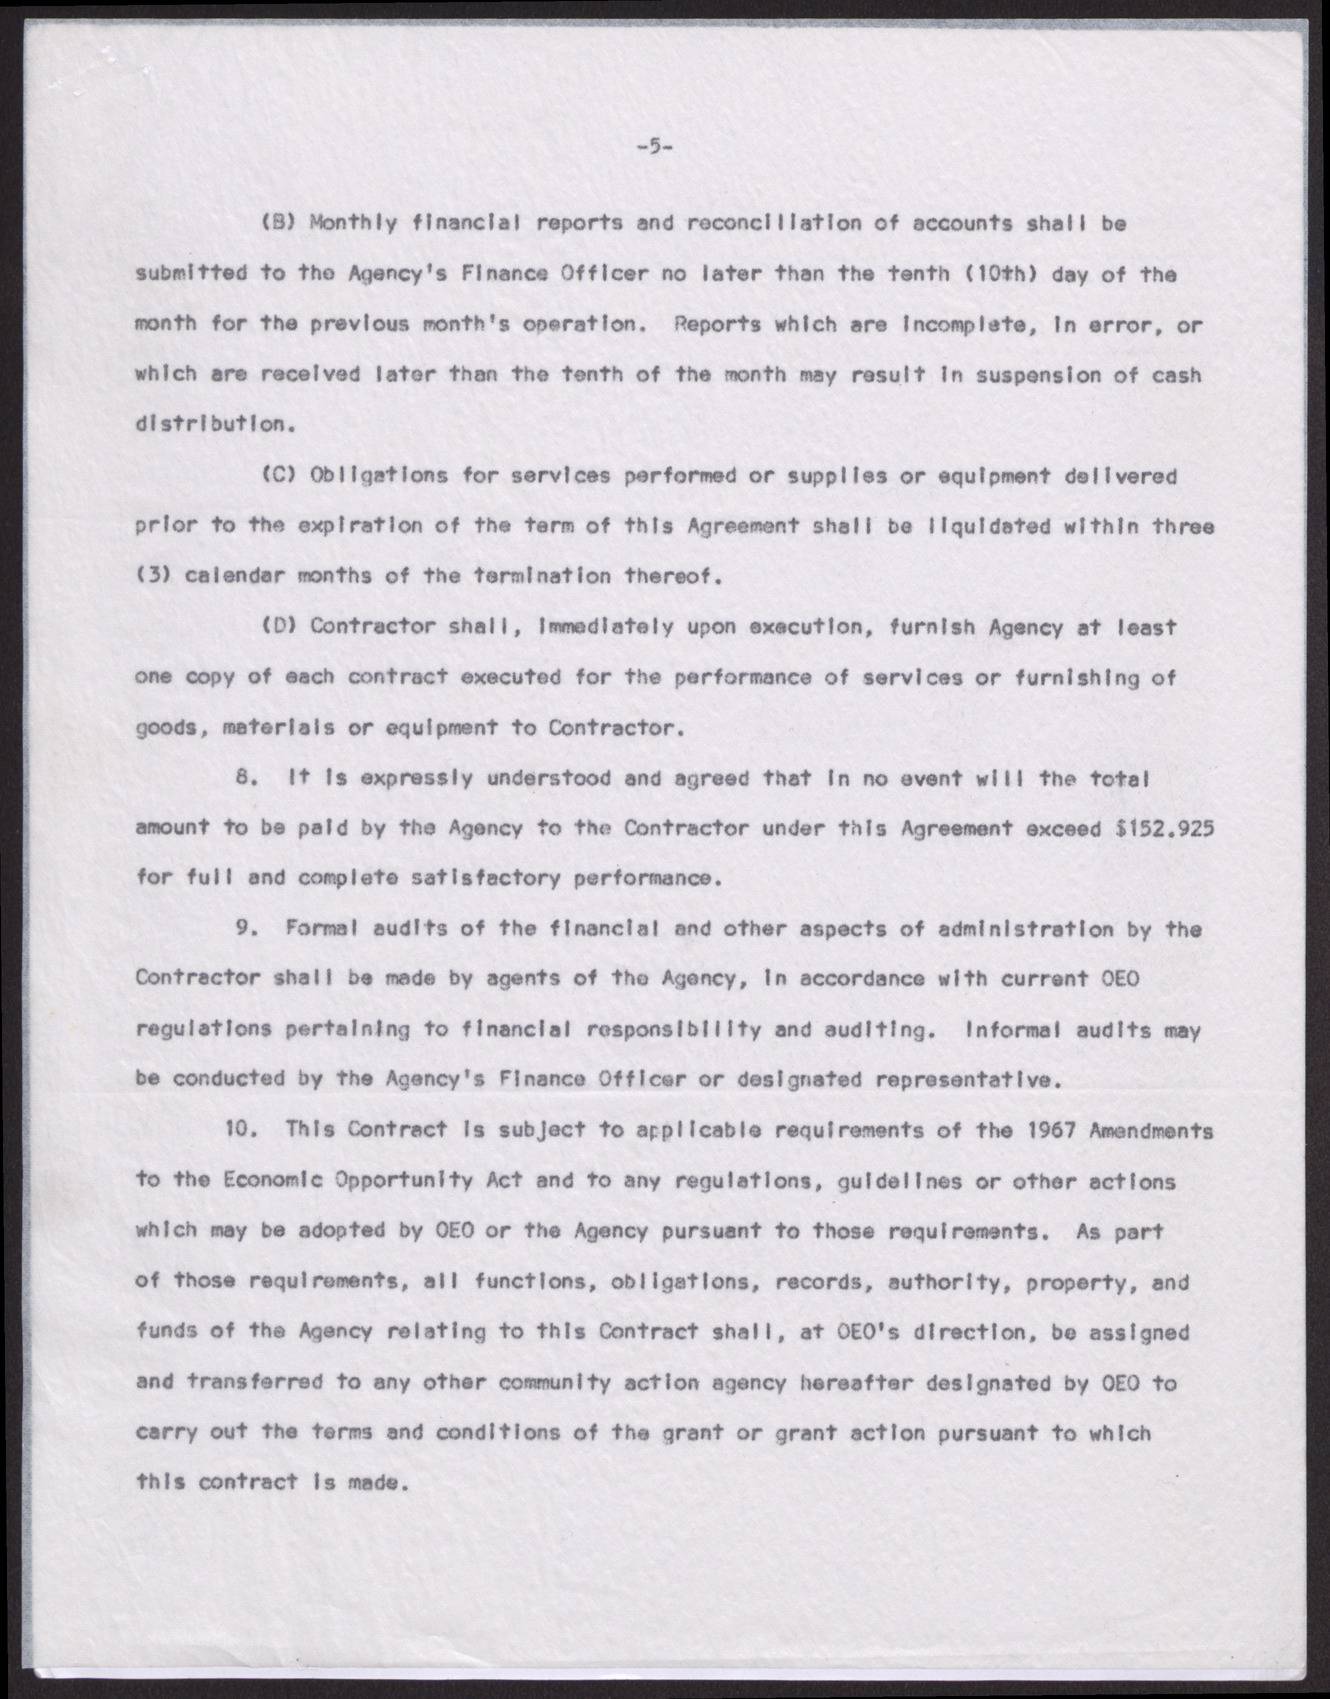 Contract of agreement between the EOB ad Operation Independence, Inc. (6 pages), January 1, 1968, page 5